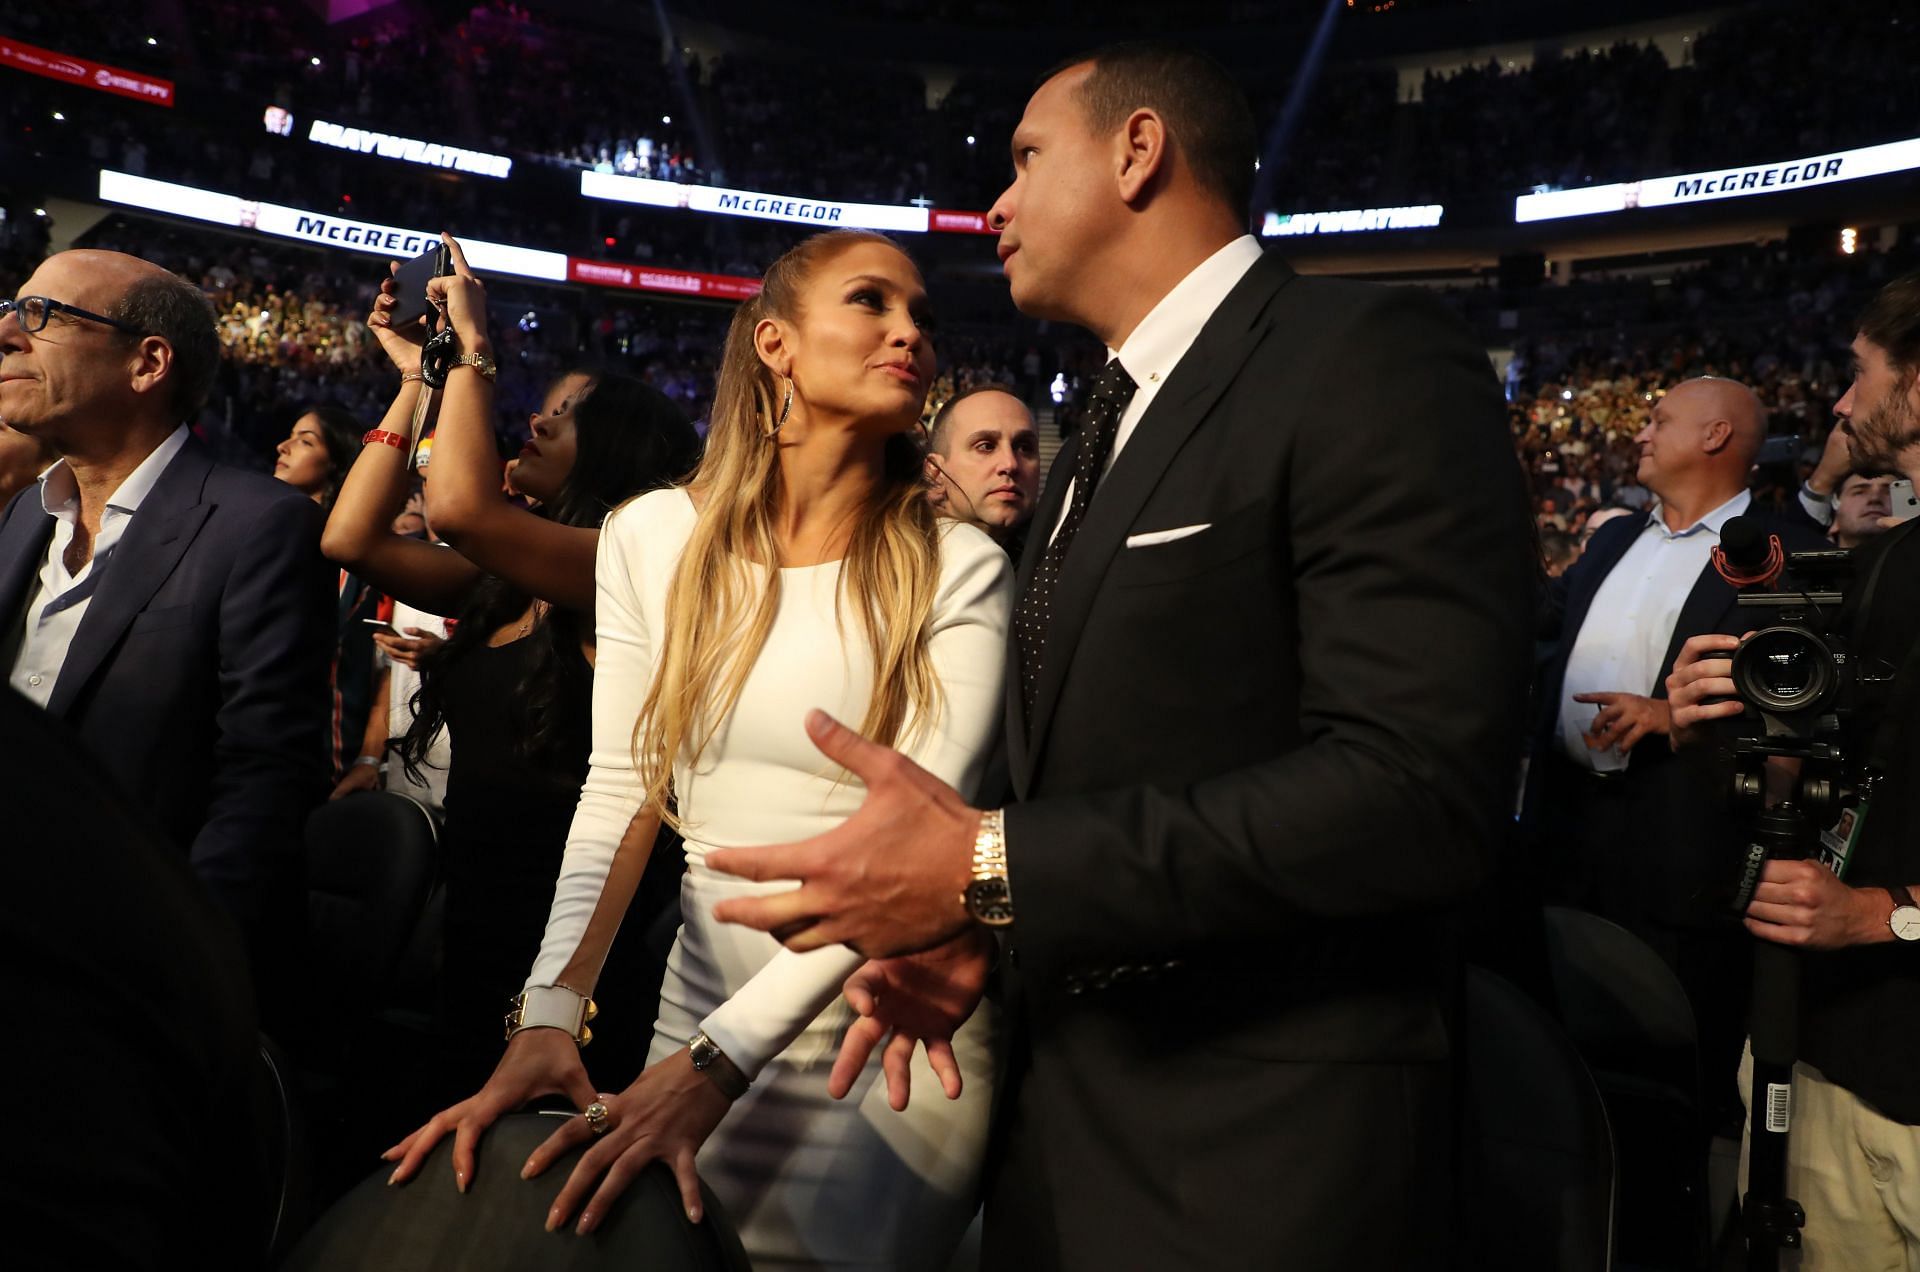 Alex Rodriguez and Jlo at the Floyd Mayweather Jr. vs. Conor McGregor fight